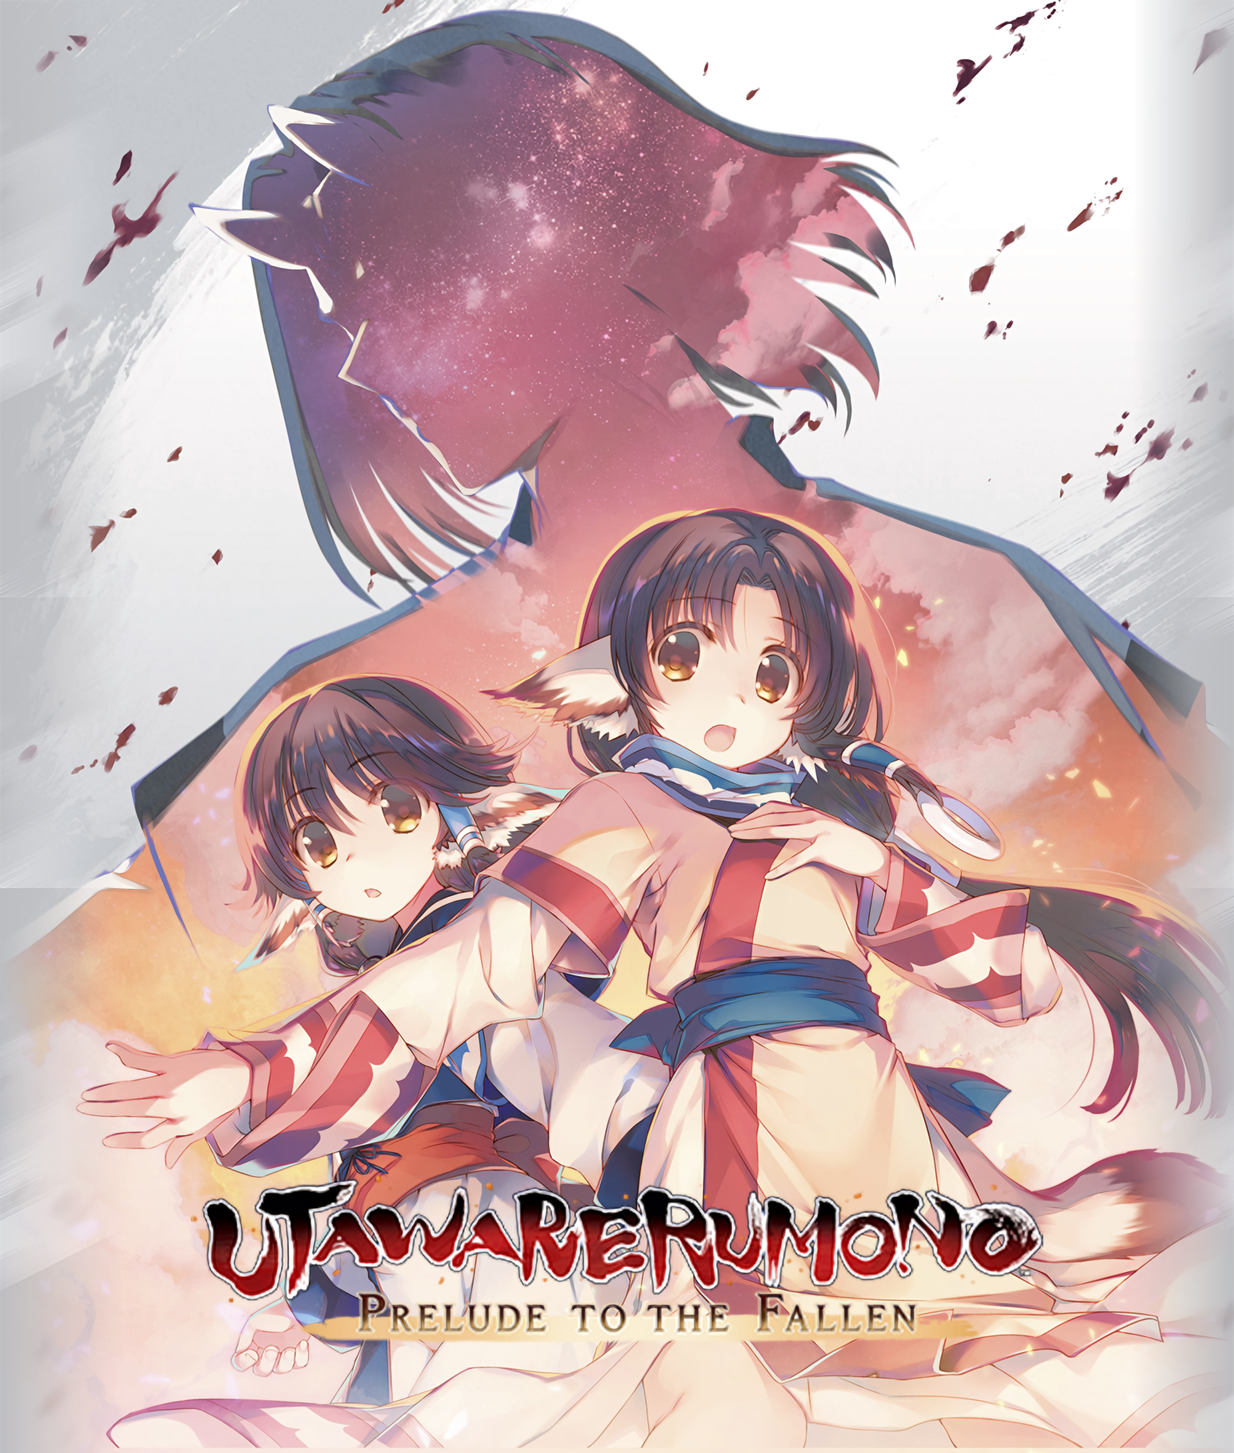 Utawarerumono: Prelude to the Fallen Picture by RealPitchers